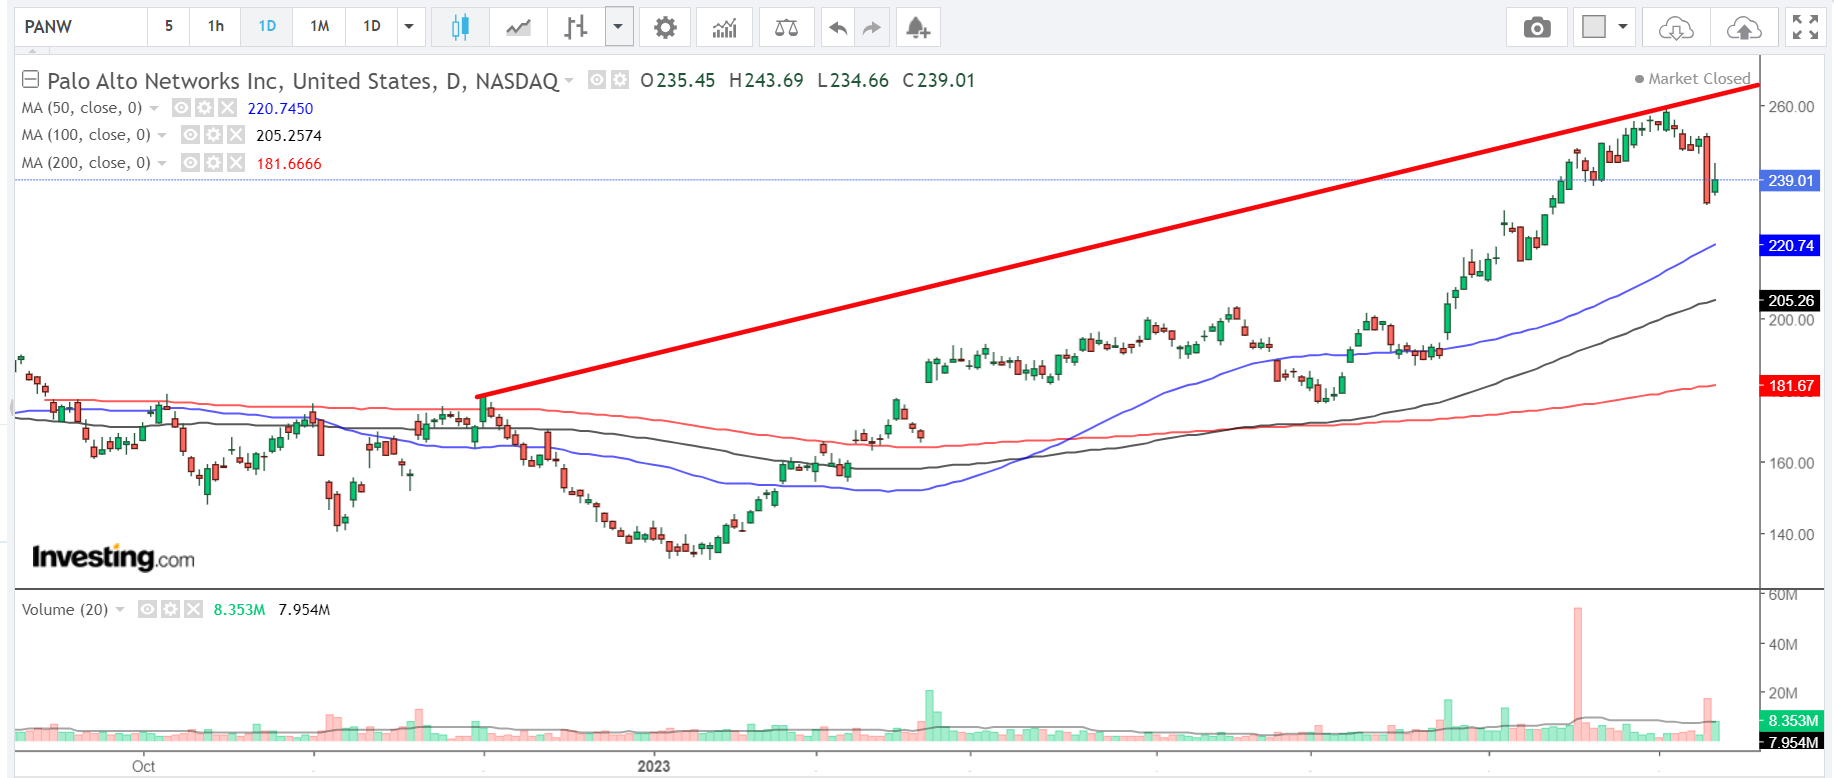 PANW Daily Chart